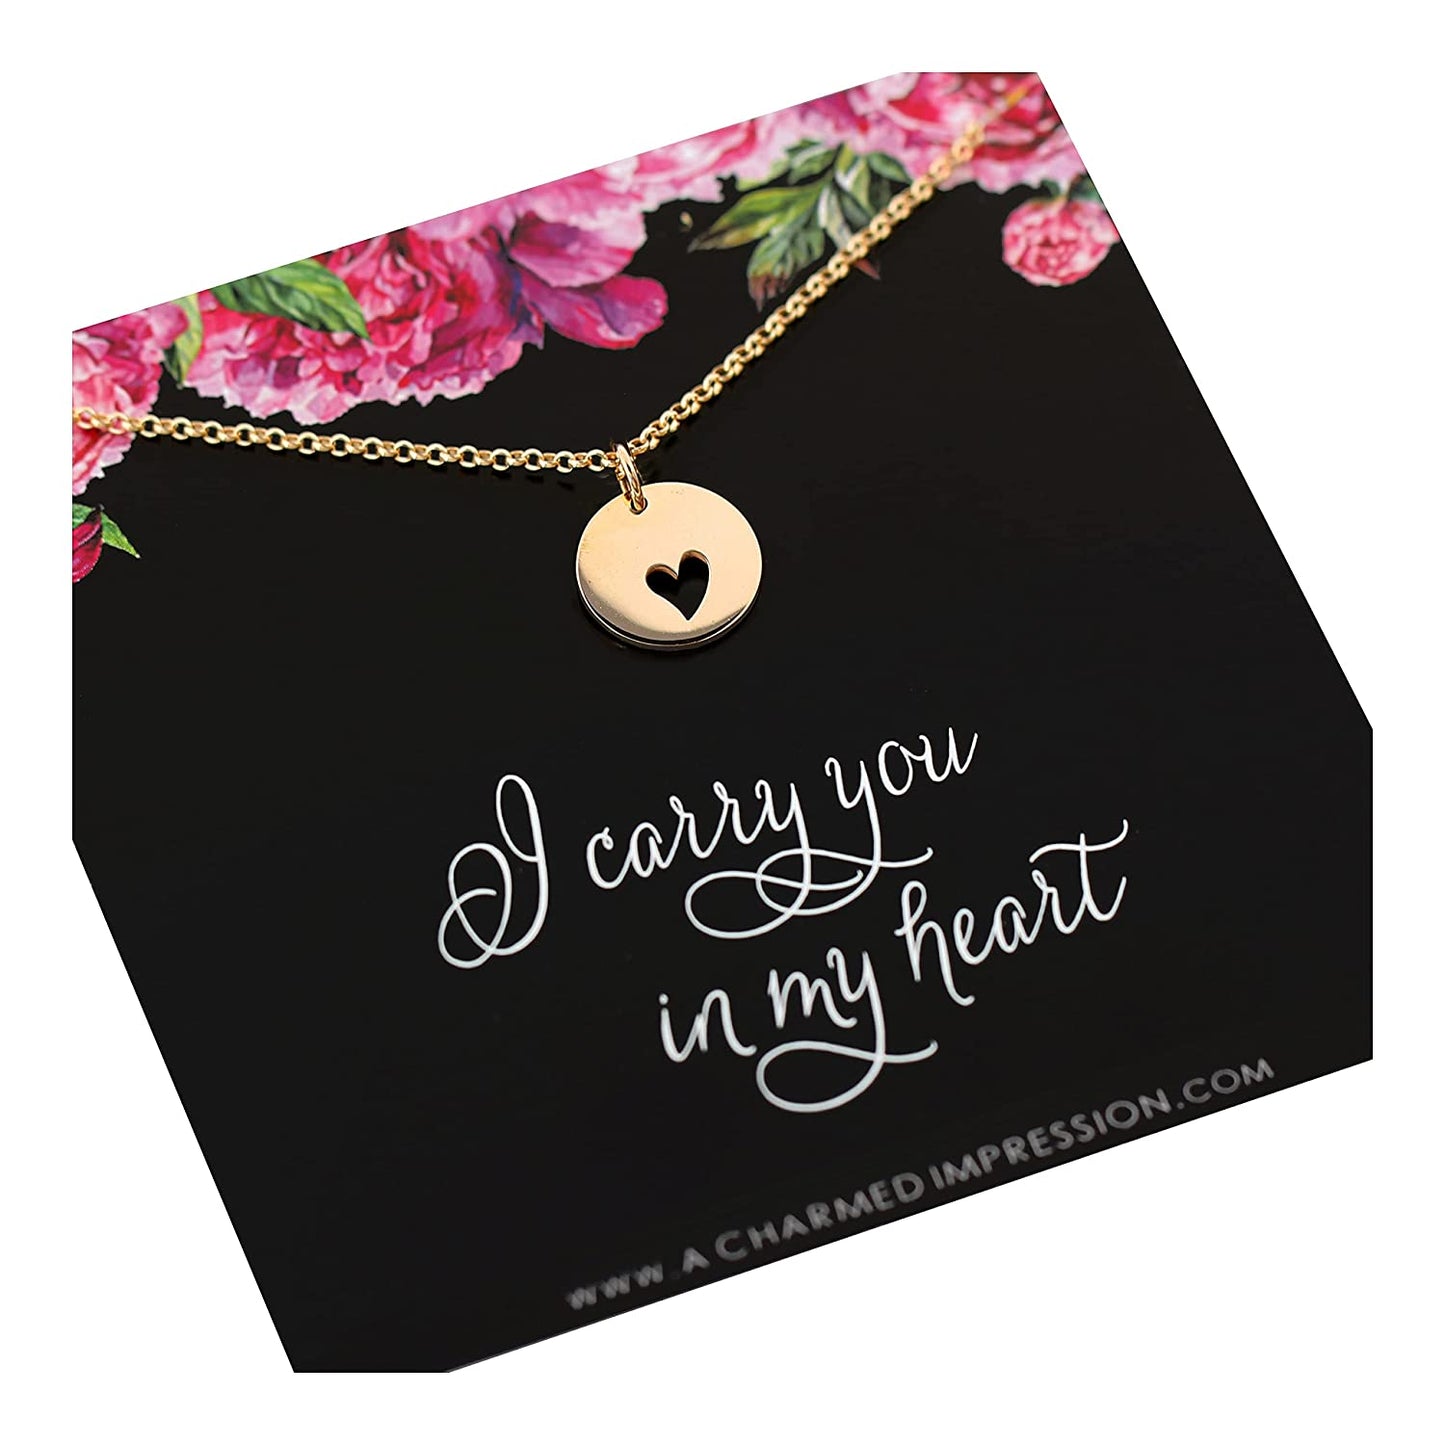 I Carry Your Heart with Me Necklace • Gifts for Women • 14k Gold • Love Charm Jewelry • Adoption • Remembrance • Grief Loss of Loved One • Long Distance Couple • Deployment Gift for Wife Girlfriend